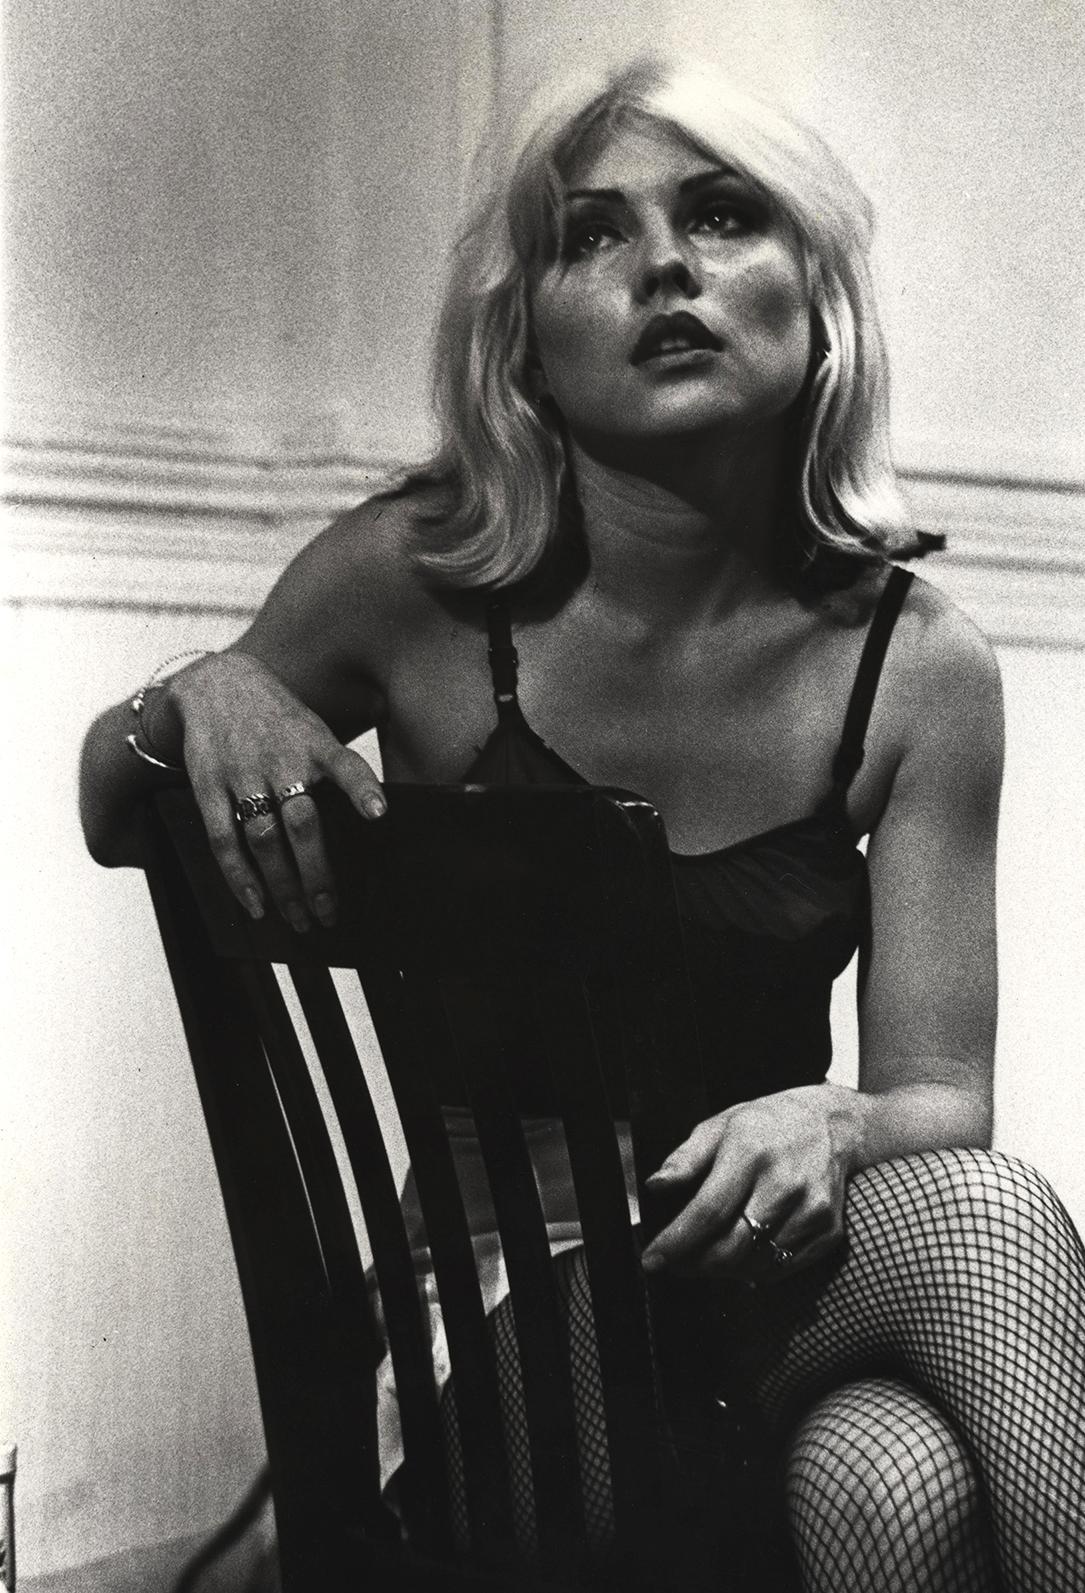 Fernando Natalici Black and White Photograph - Debbie Harry on the set of Unmade Beds East Village 1976 (Blondie photograph) 